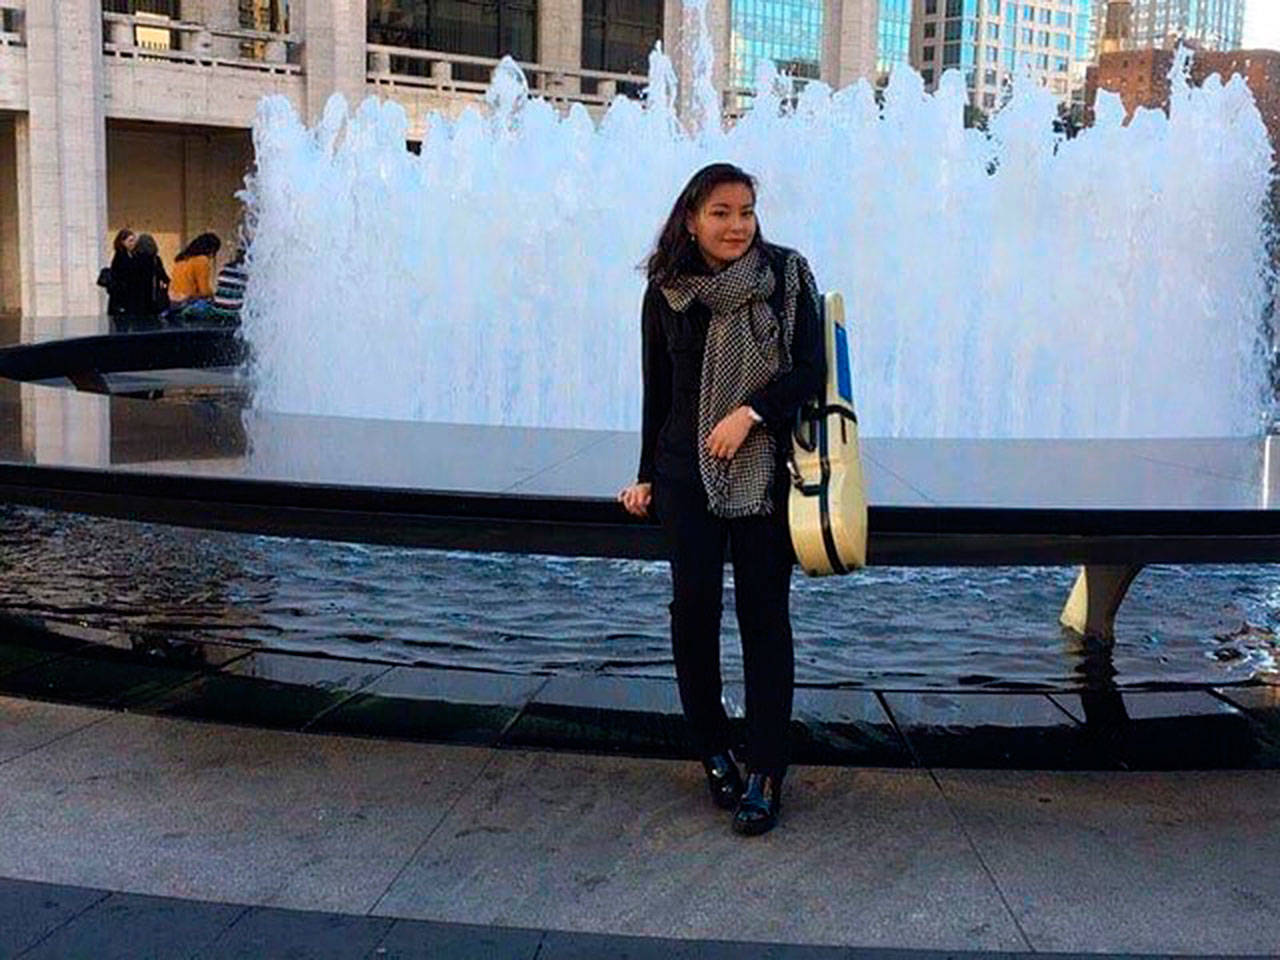 Mira Yamamoto in front of the Lincoln Center Fountain in New York City. She graduated from Juilliard School May 24. Photo provided